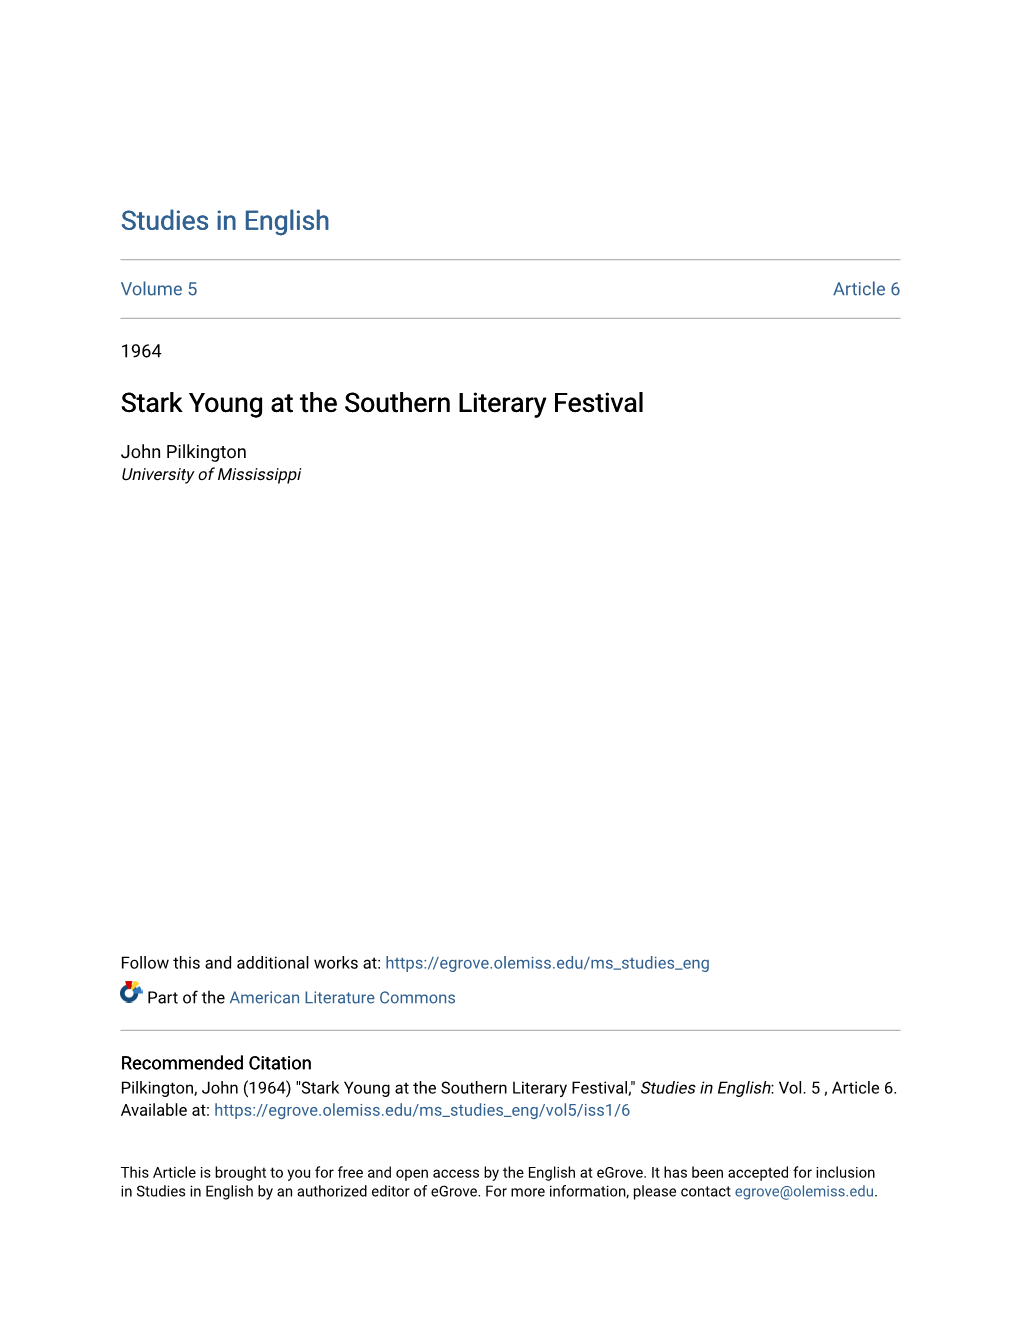 Stark Young at the Southern Literary Festival